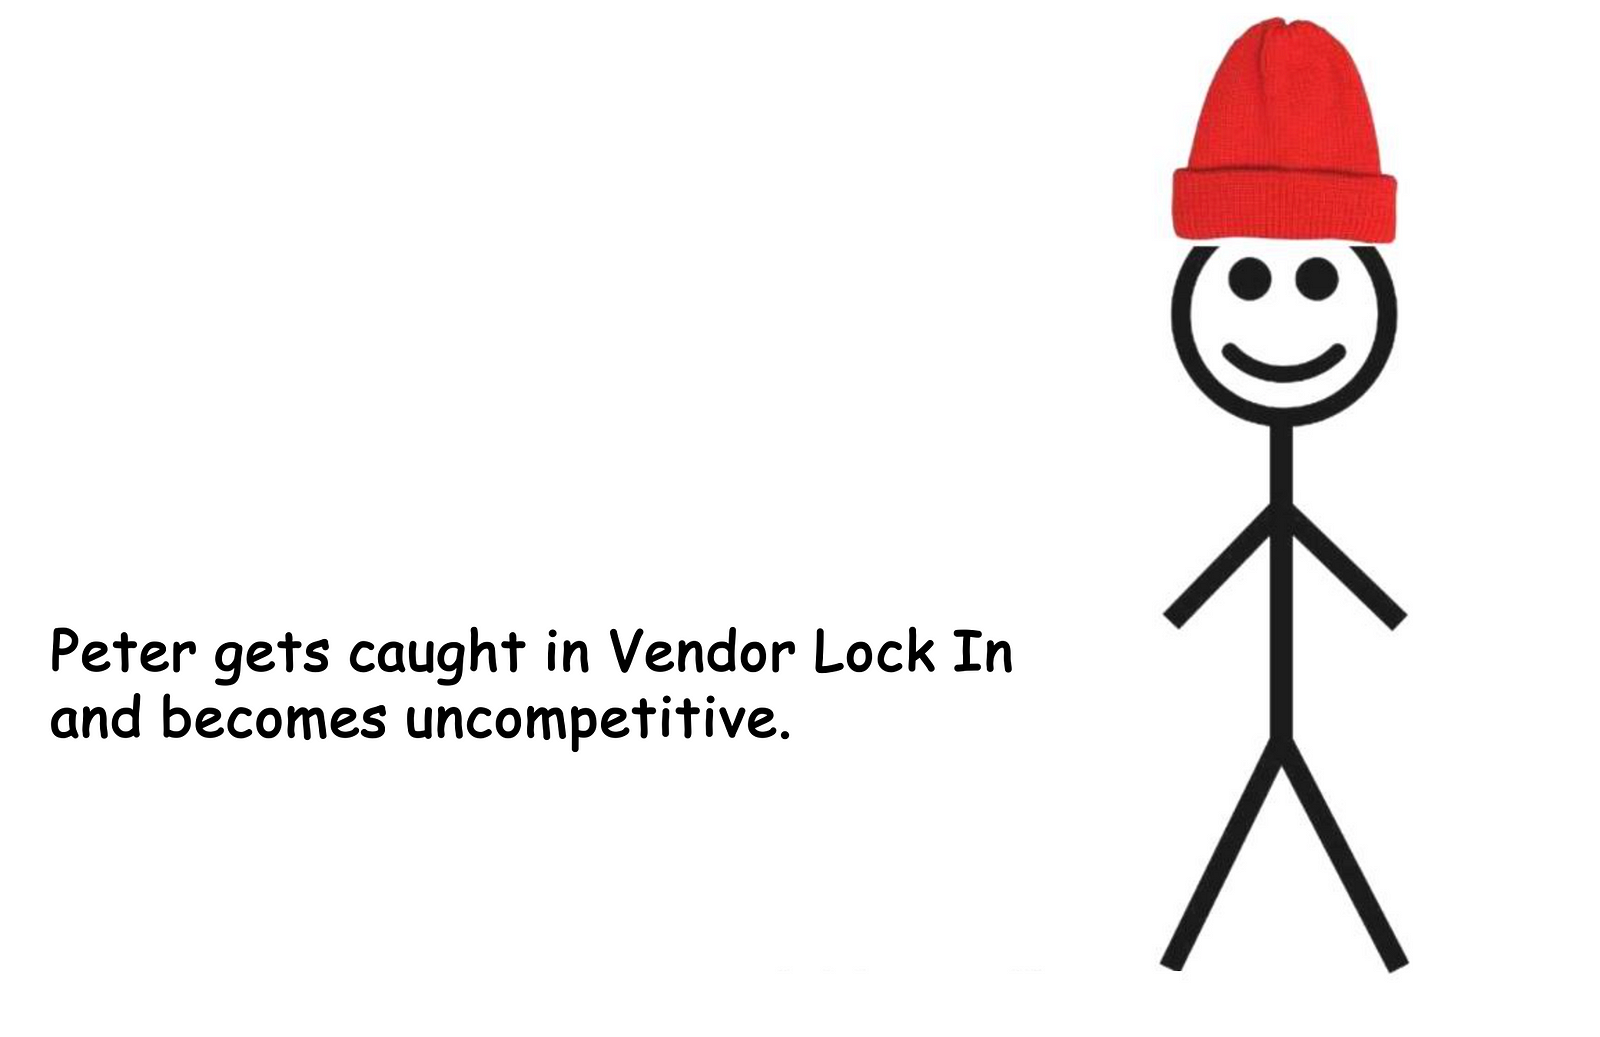 Peter gets caught in Vendor Lock In and becomes uncompetitive.